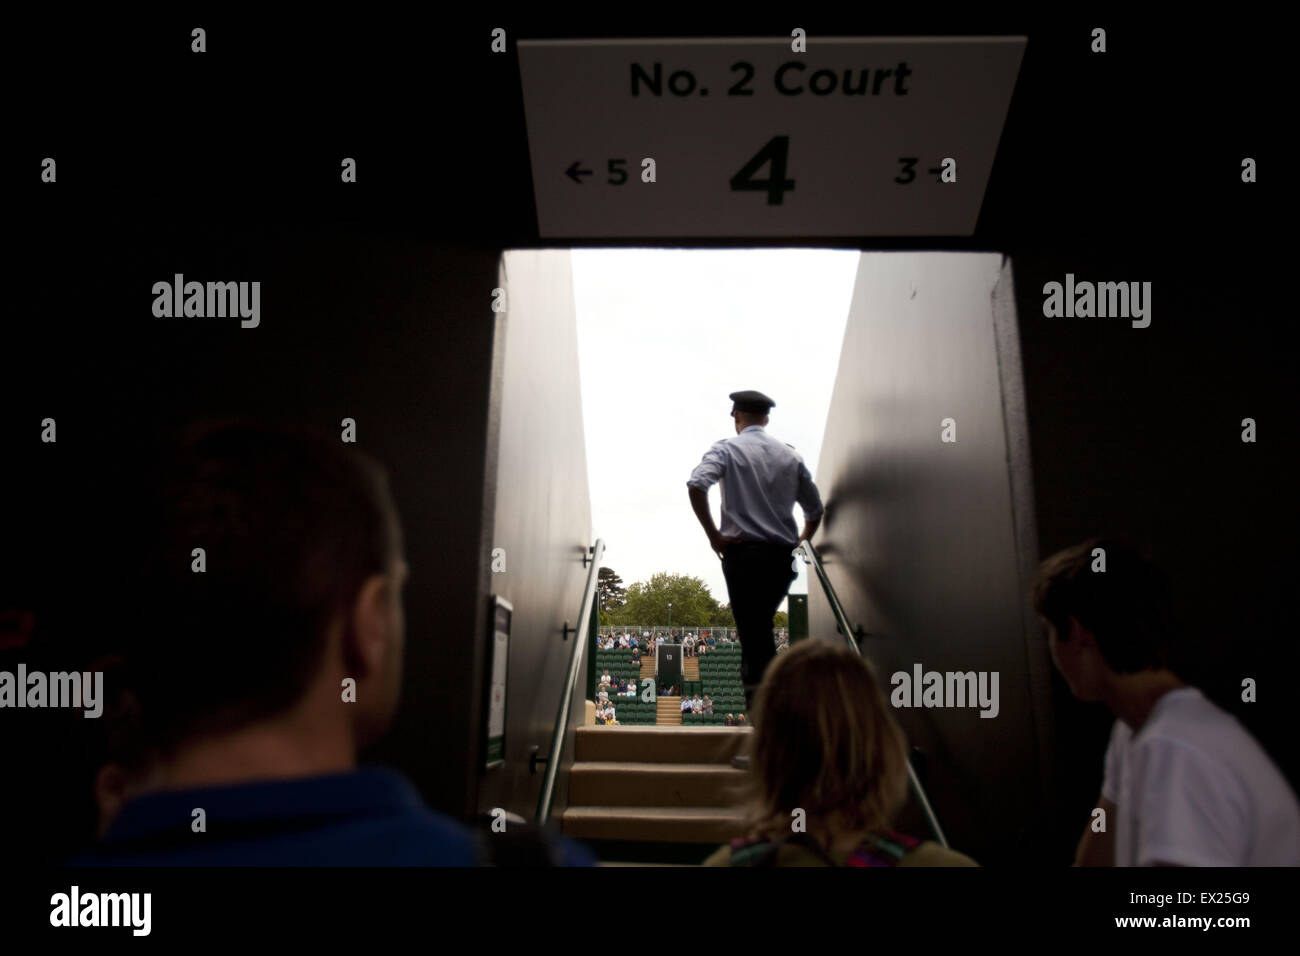 London, UK. 3rd July, 2015. Spectators trying to get to the Court 2.The Championships, Wimbledon or simply Wimbledon, is the oldest tennis tournament in the world, and is widely considered the most prestigious. It has been held at the All England Club in Wimbledon, London since 1877, London, UK. © Veronika Lukasova/ZUMA Wire/Alamy Live News Stock Photo